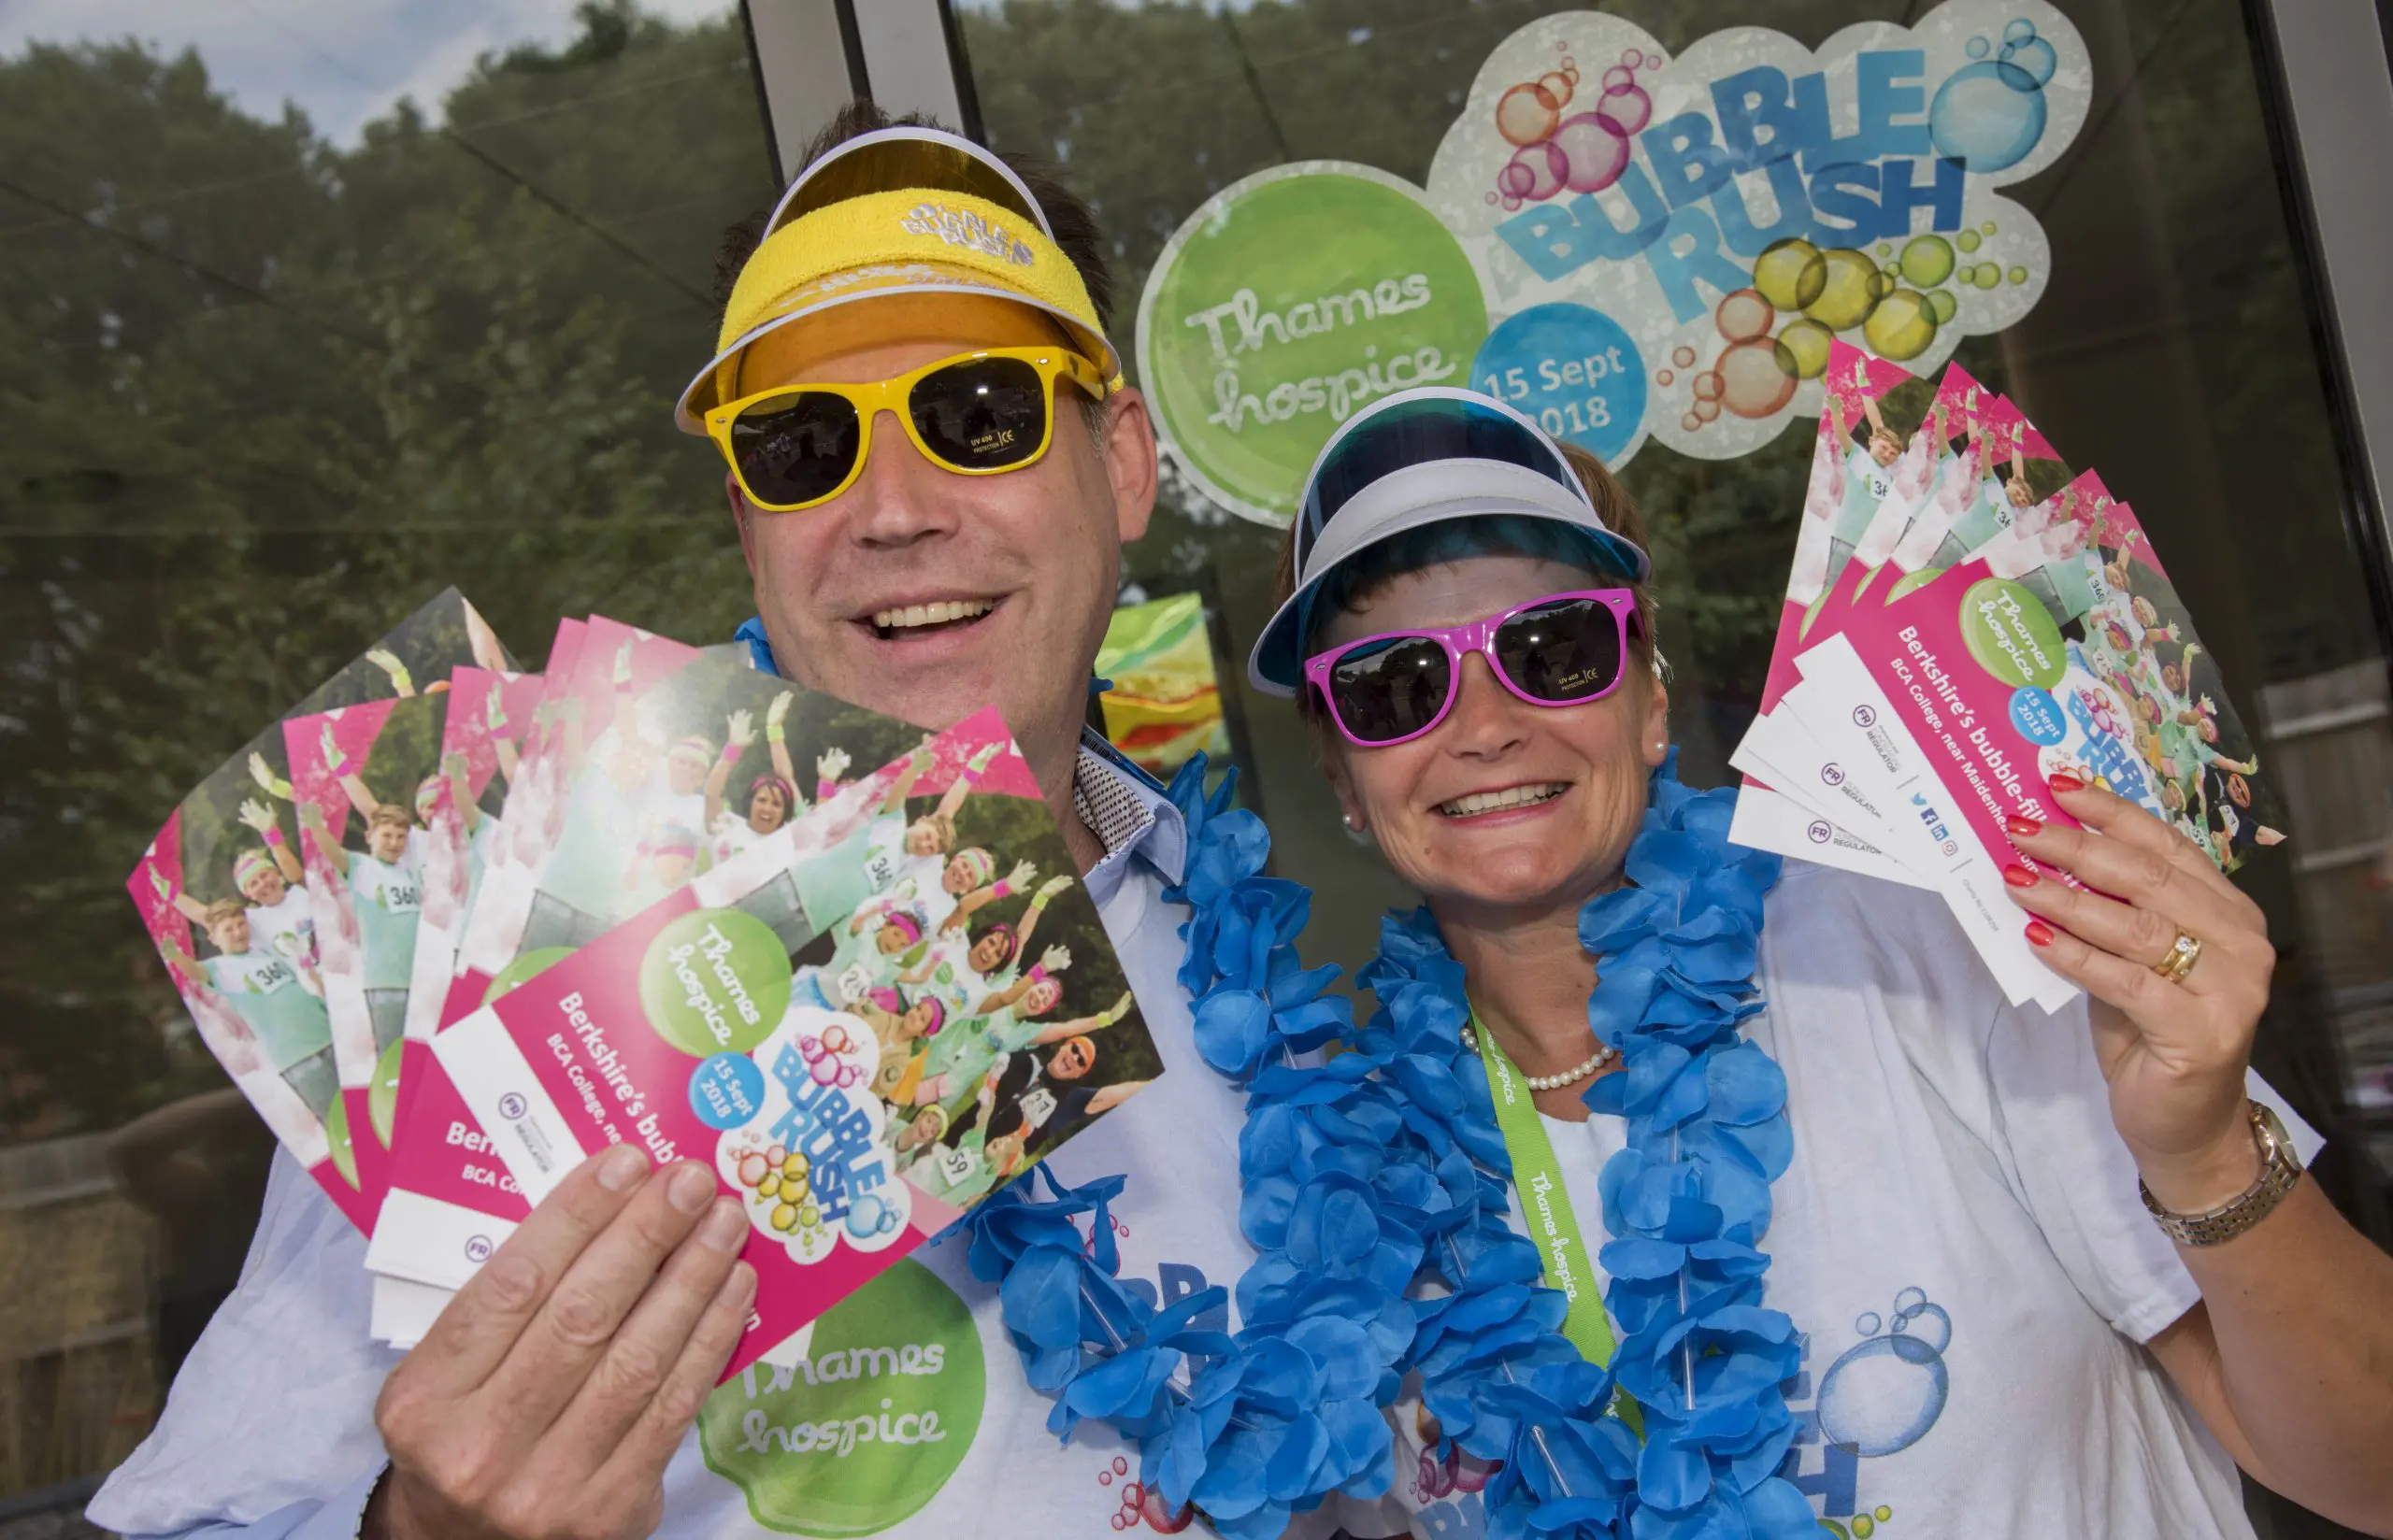 Neil Grundon (left) joined Debbie Raven, Chief Executive at Thames Hospice, to show his support for Bubble Rush